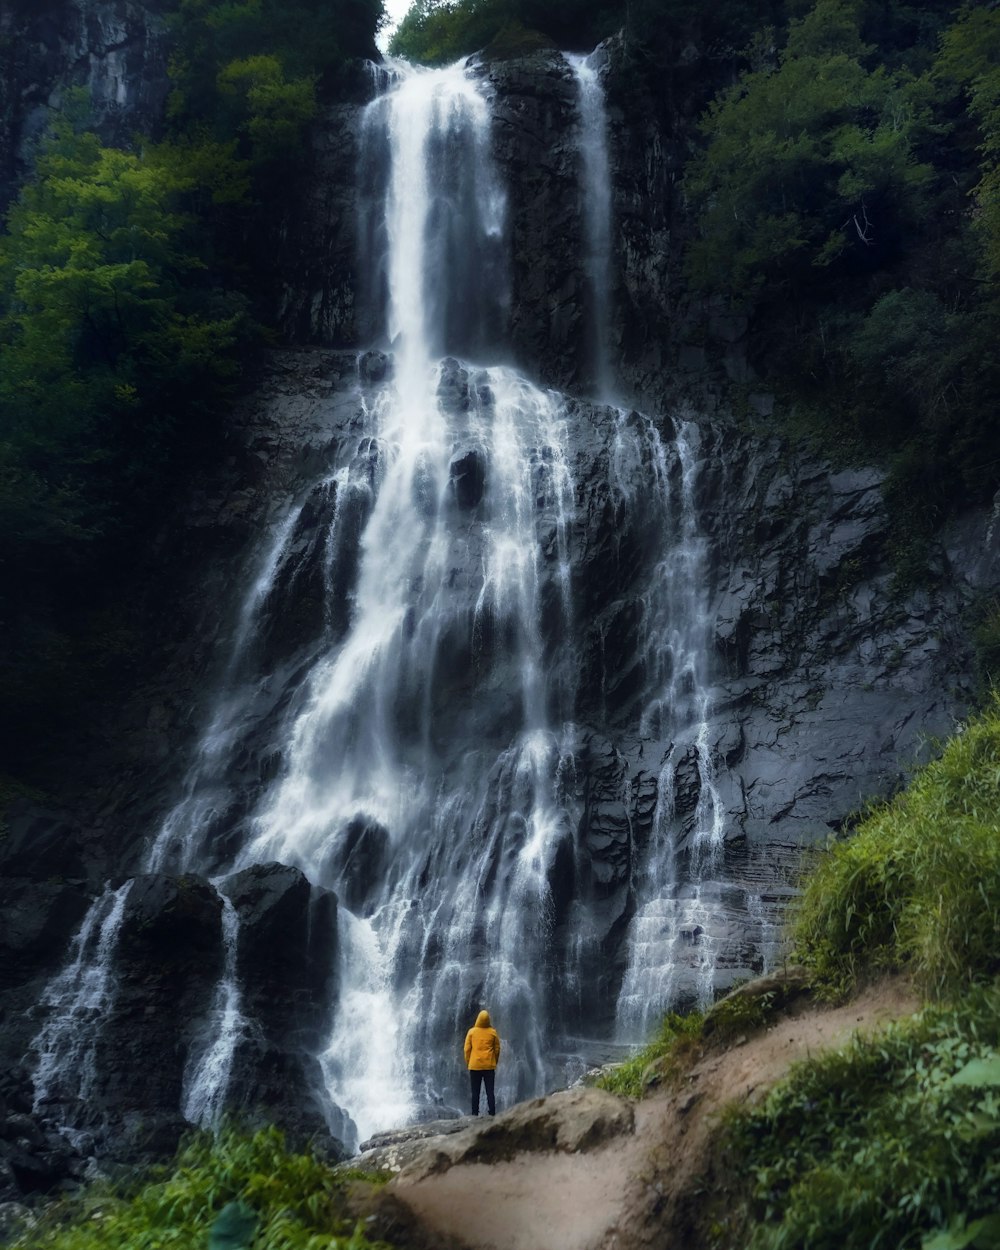 a person standing in front of a waterfall